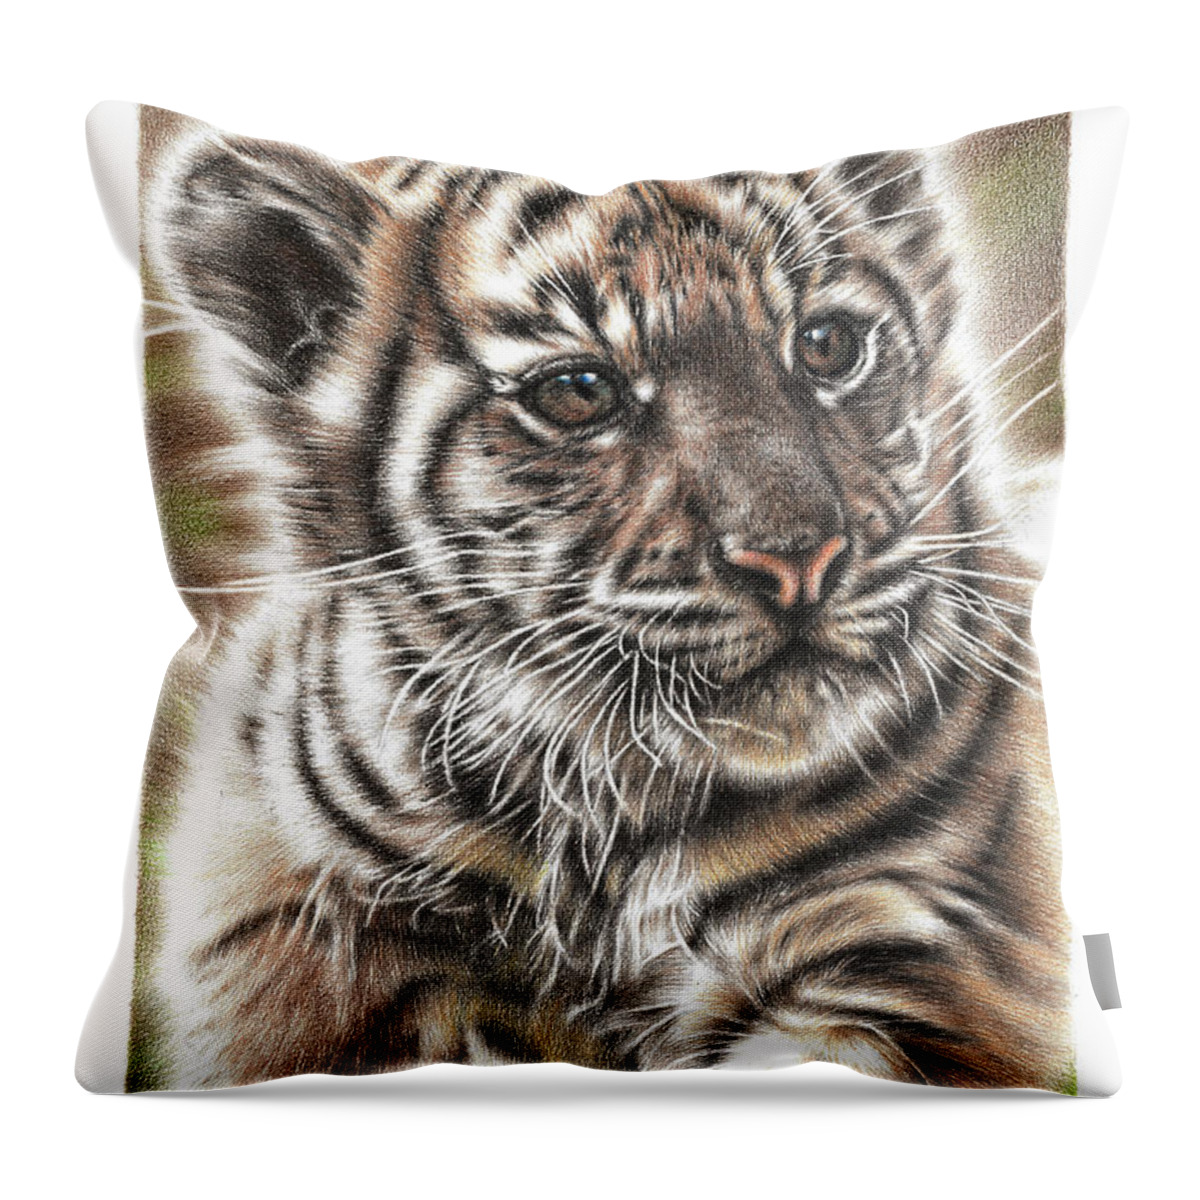 Tiger Throw Pillow featuring the drawing Fluffy Tiger Cub by Casey 'Remrov' Vormer